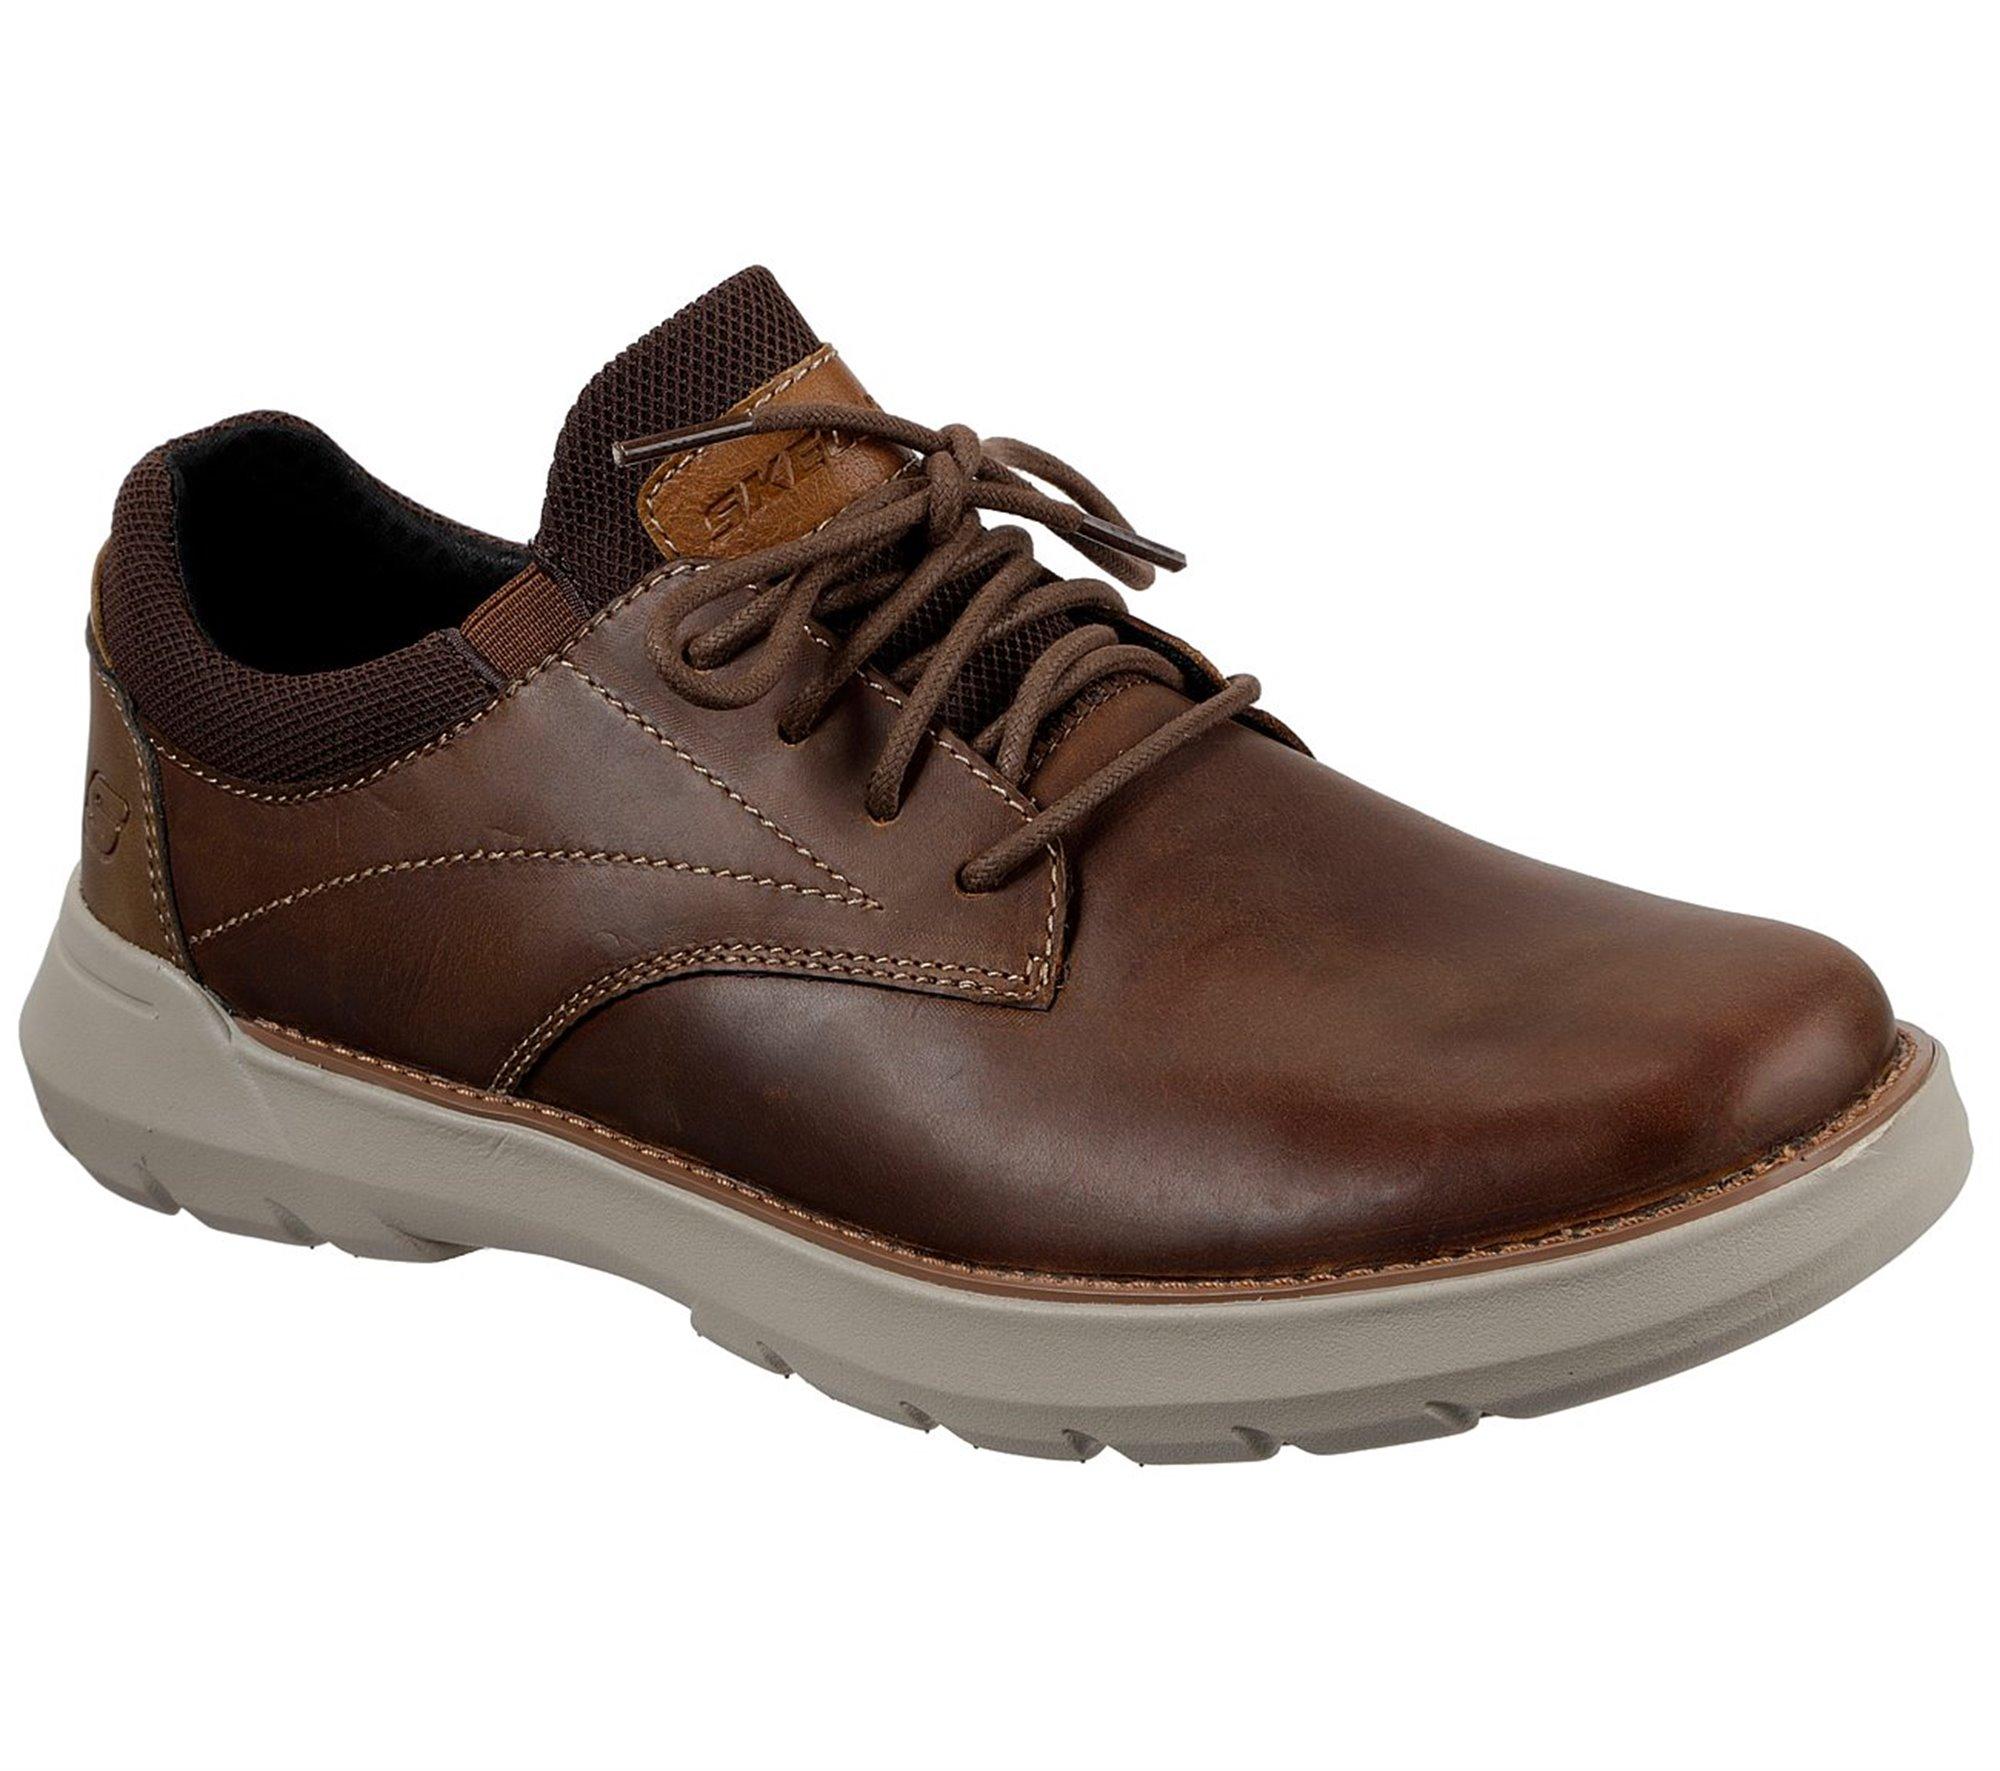 Skechers Relaxed Fit: Doveno - Vander in Brown for Men - Save 4% - Lyst